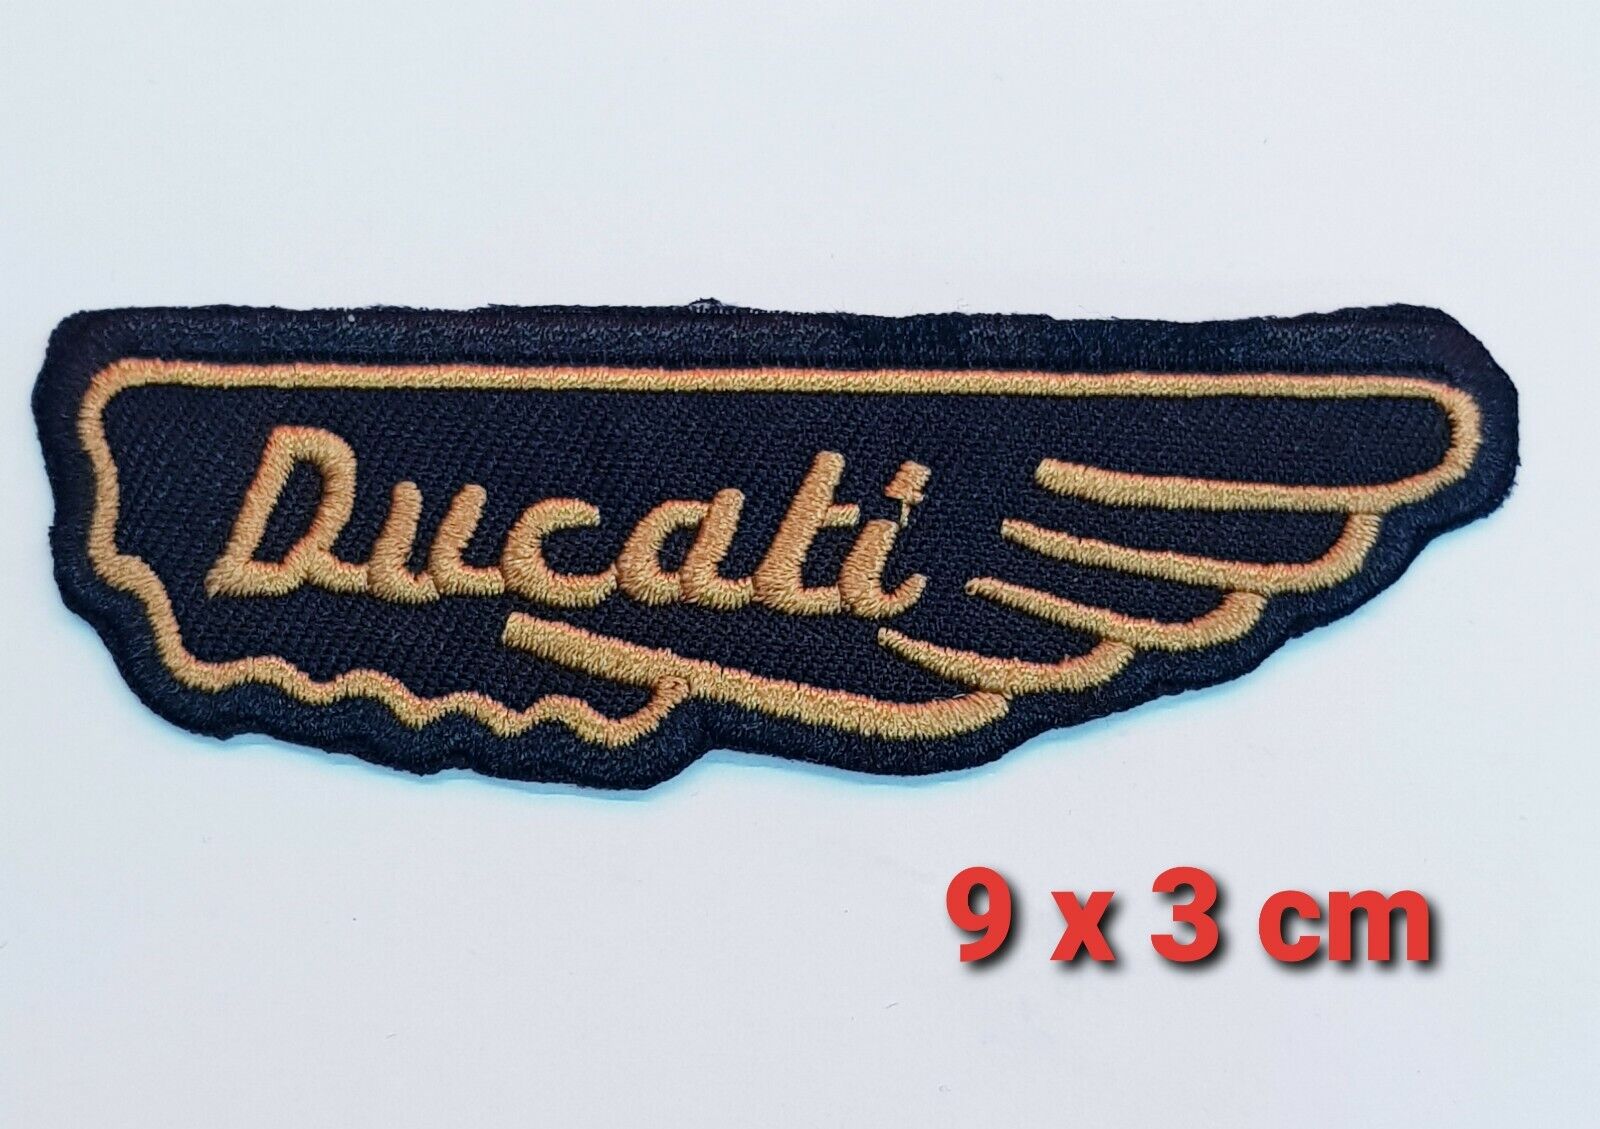 Ducati wing logo art badge large Embroidered Iron on Sew on Patch